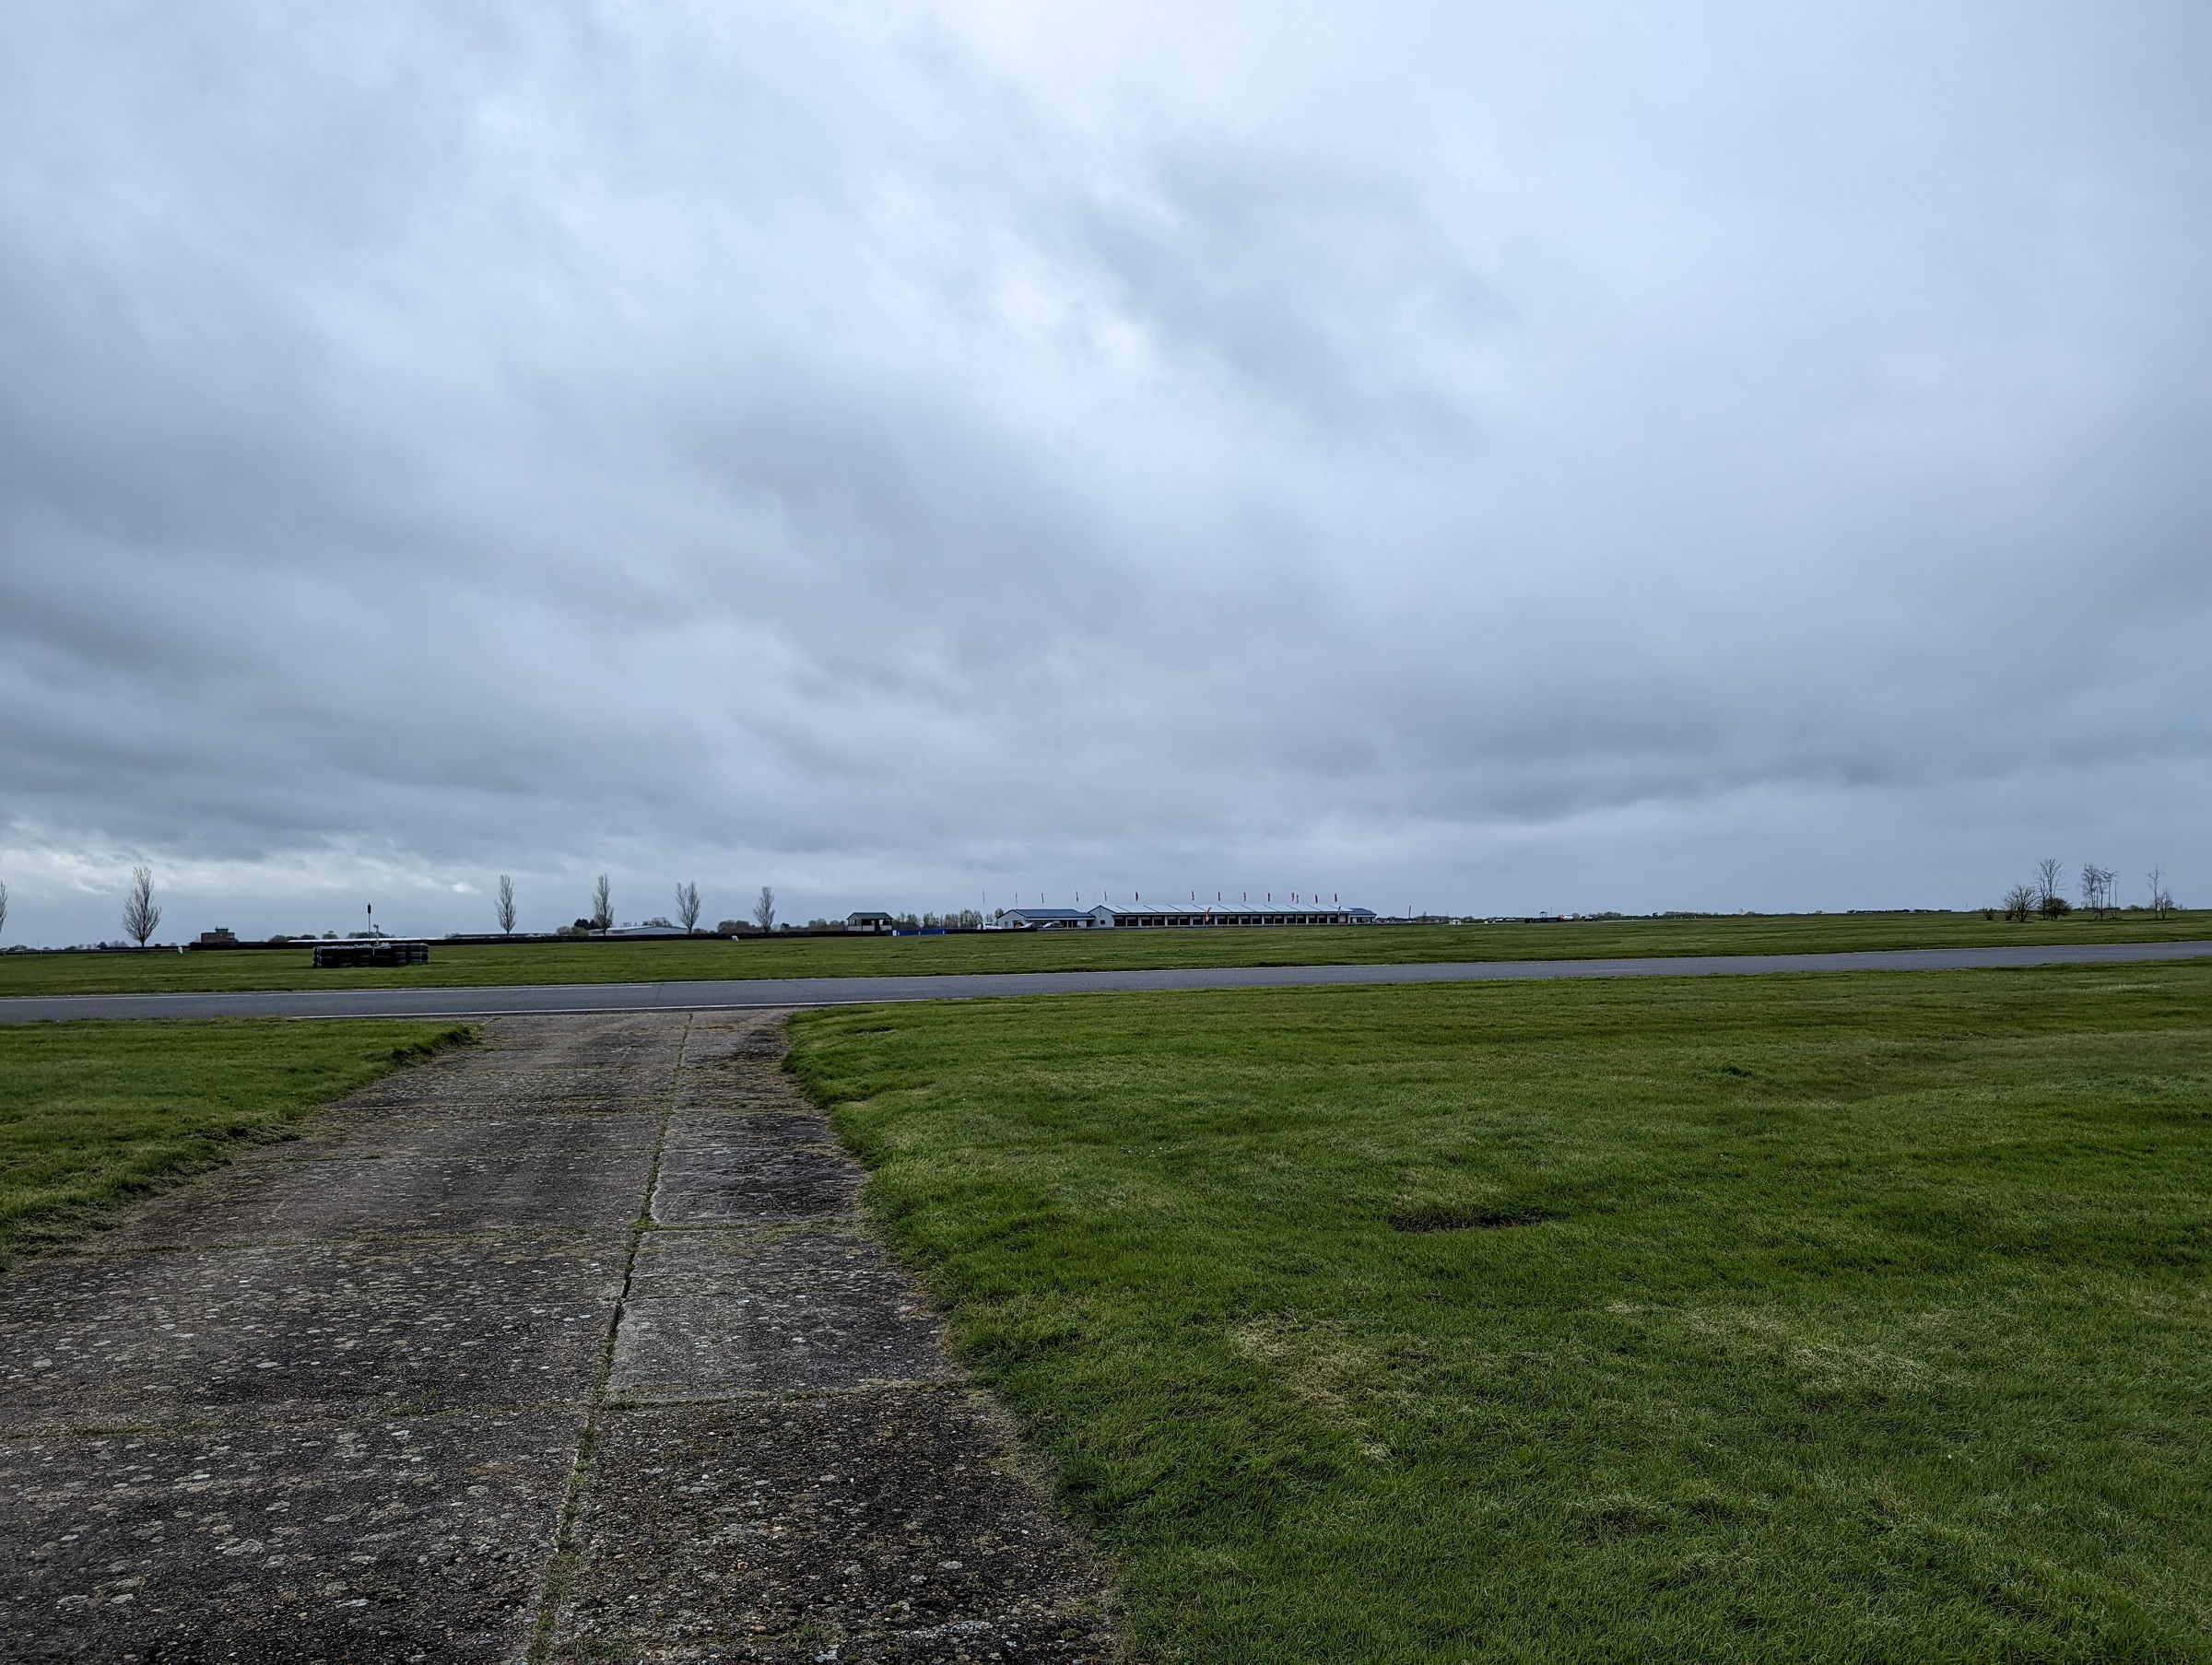 Pistonheads - This is a color photograph showing an overcast sky above a runway with a paved surface. The runway leads to the horizon, where several buildings and structures can be seen under the clouds. In the foreground, there is a grassy area next to a patch of bare earth, indicating a field or a park. There's a watermark on the image that reads "grey" which could suggest the name of the photographer or the software used.